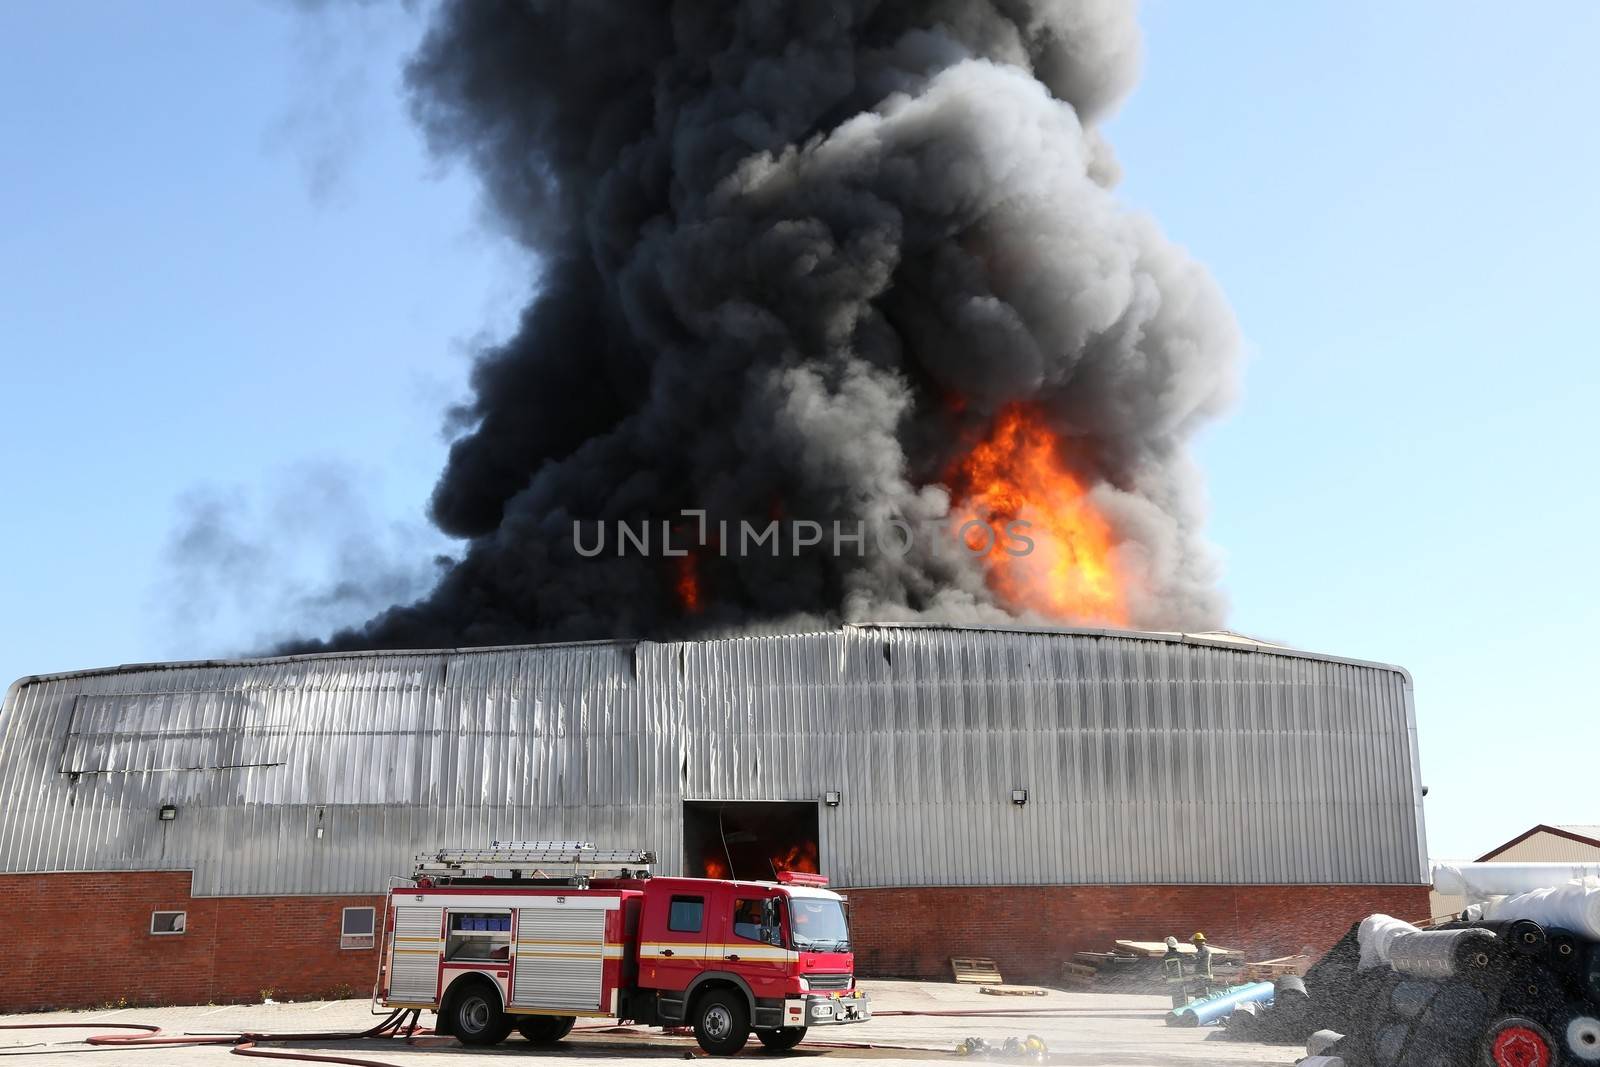 Warehouse building burning with intense flames and firemen attending